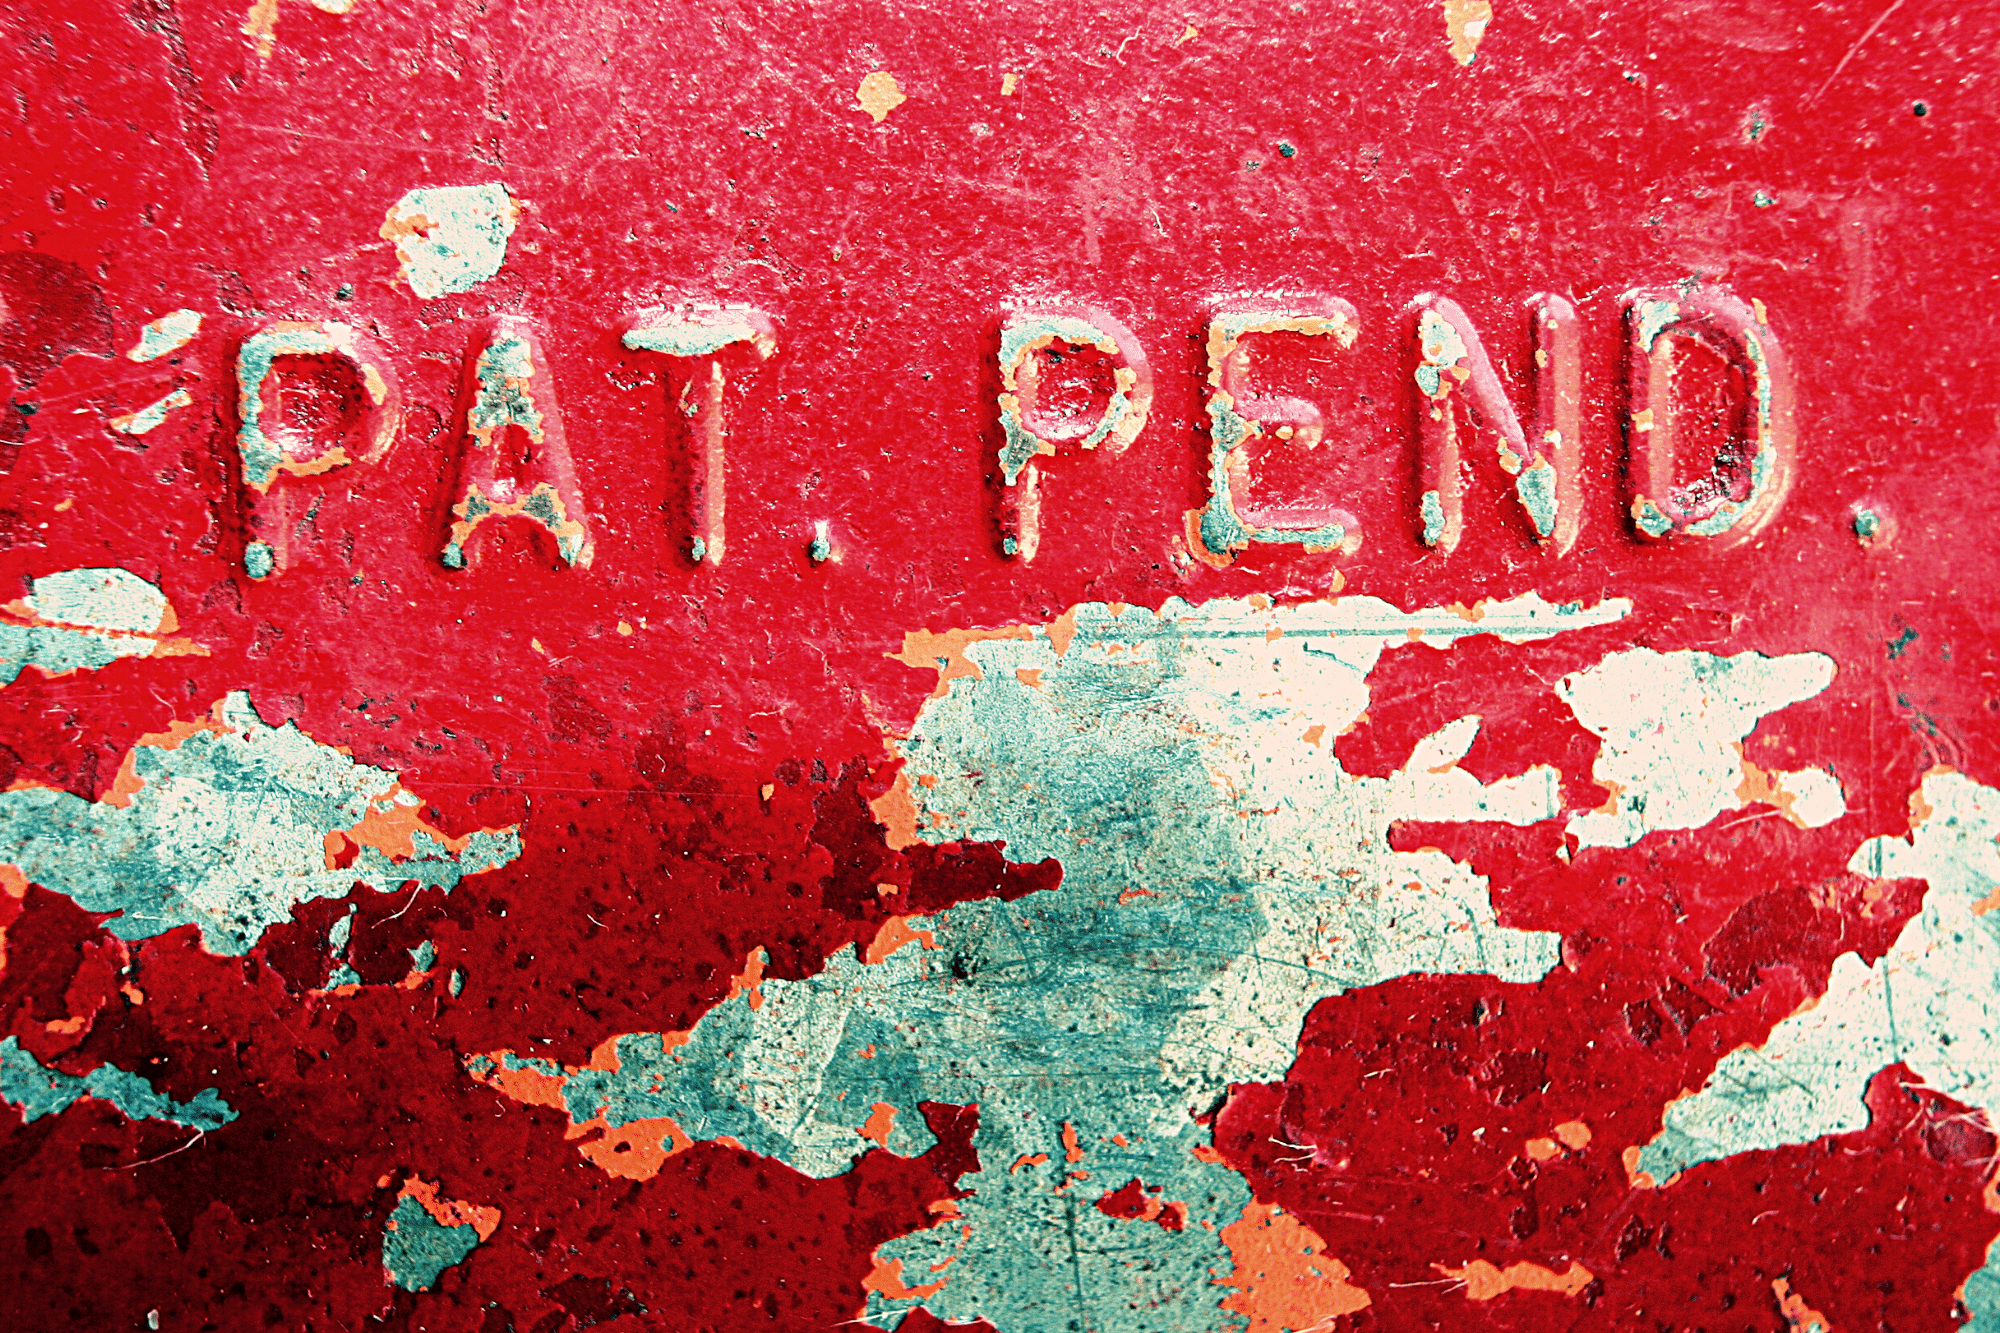 Metal with words "Pat. Pend." stamped